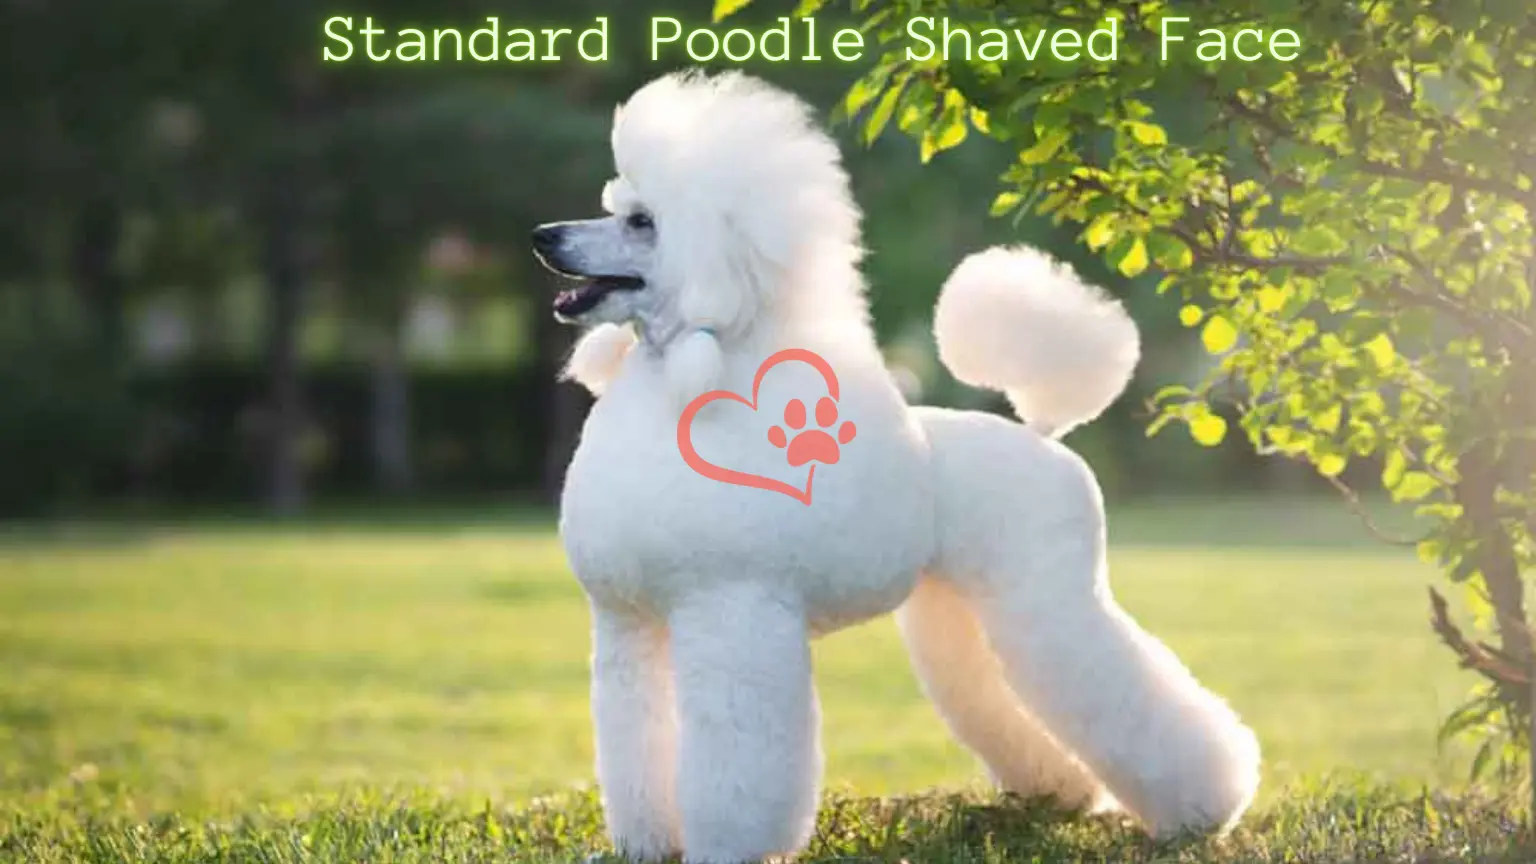 How to Maintain a Standard Poodle Shaved Face